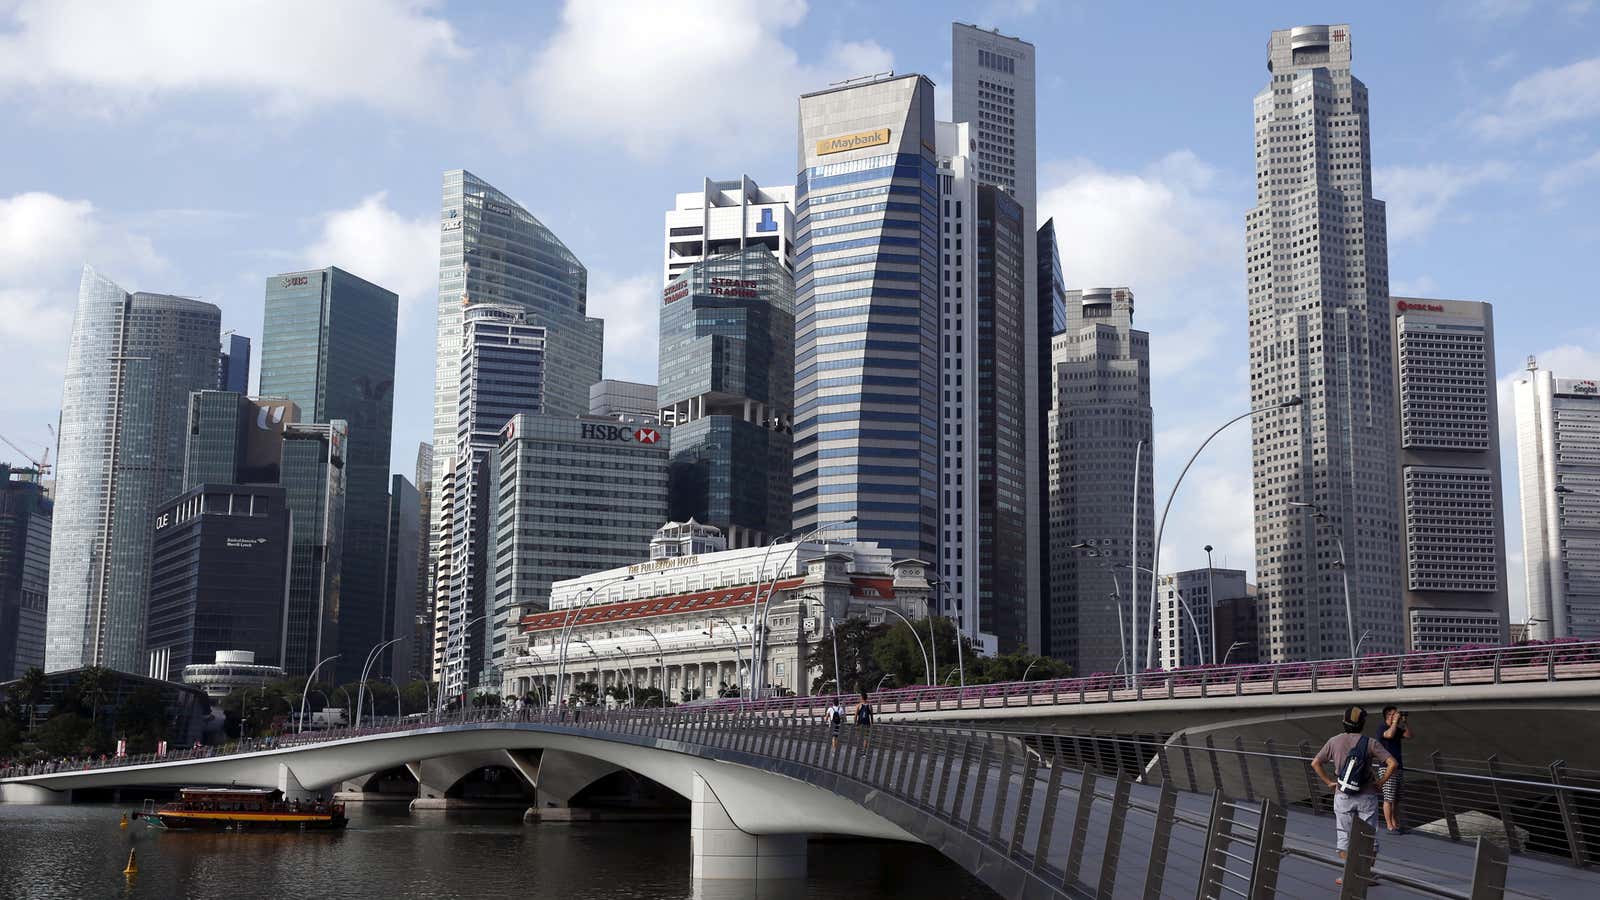 Is Singapore, with a higher per-capita income than the United States, really a developing country?